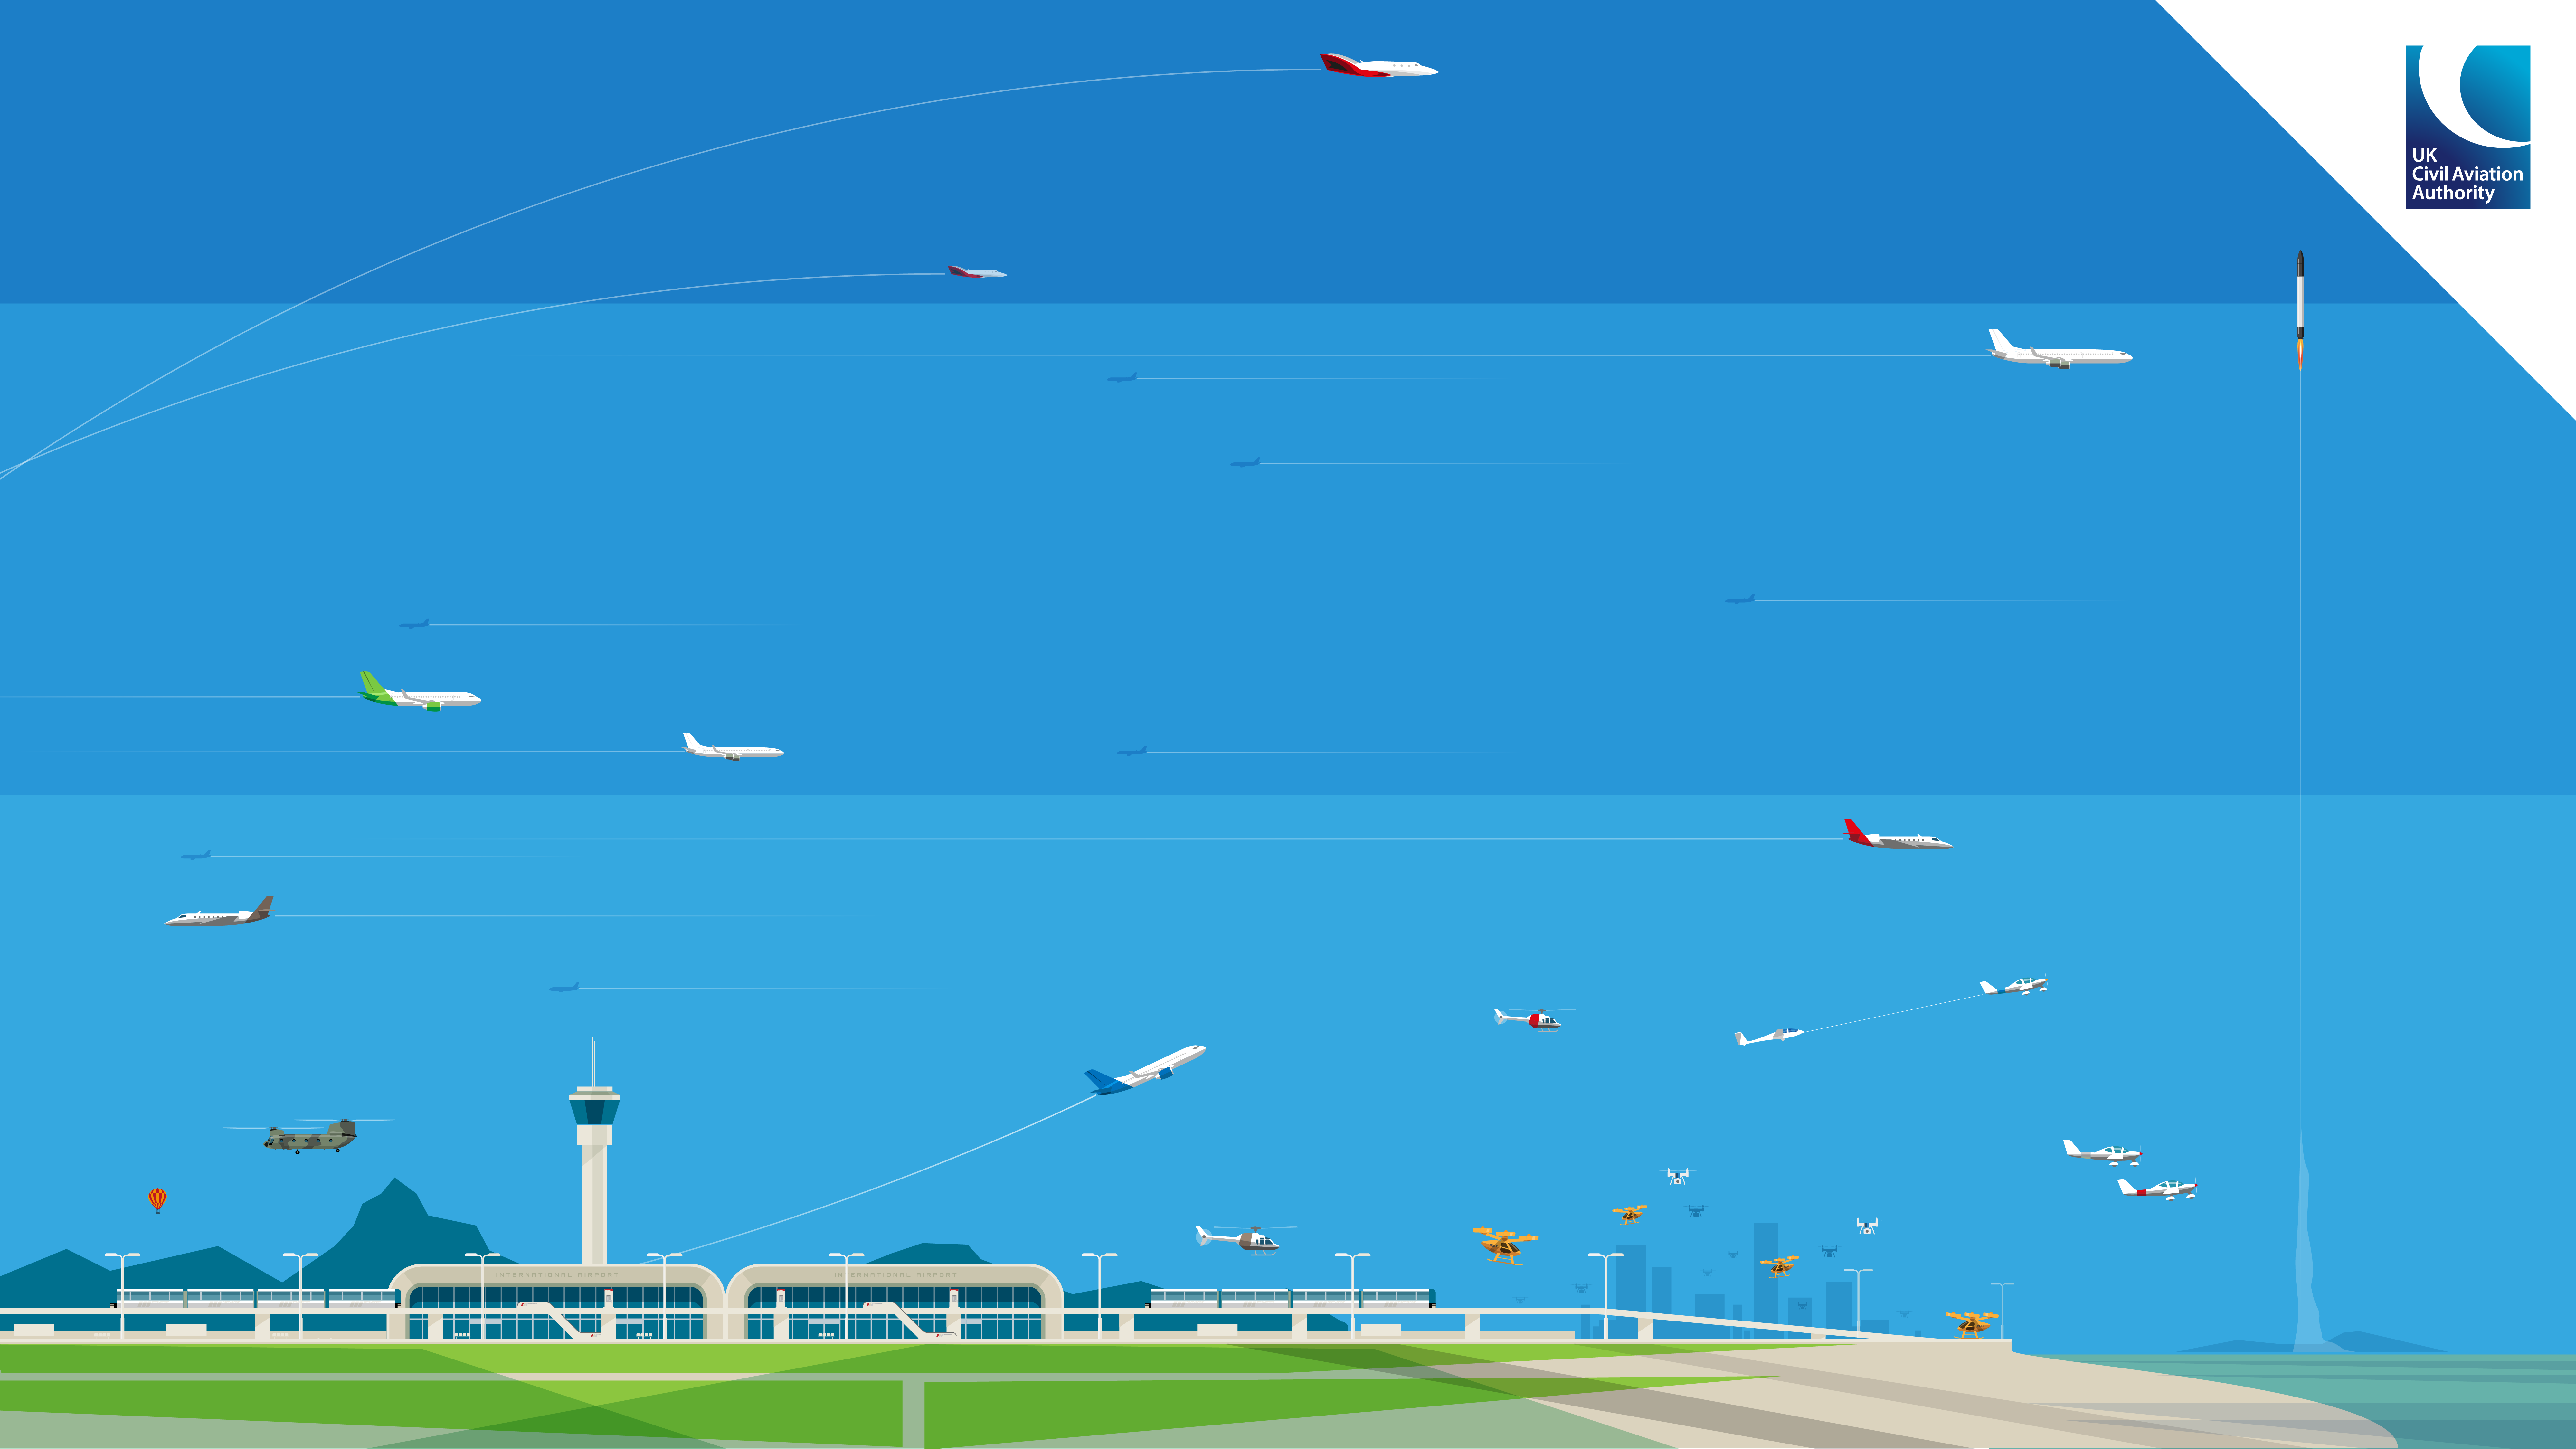 Graphic of various aircraft including drones, helicopters and aeroplanes flying or taking off at an airport